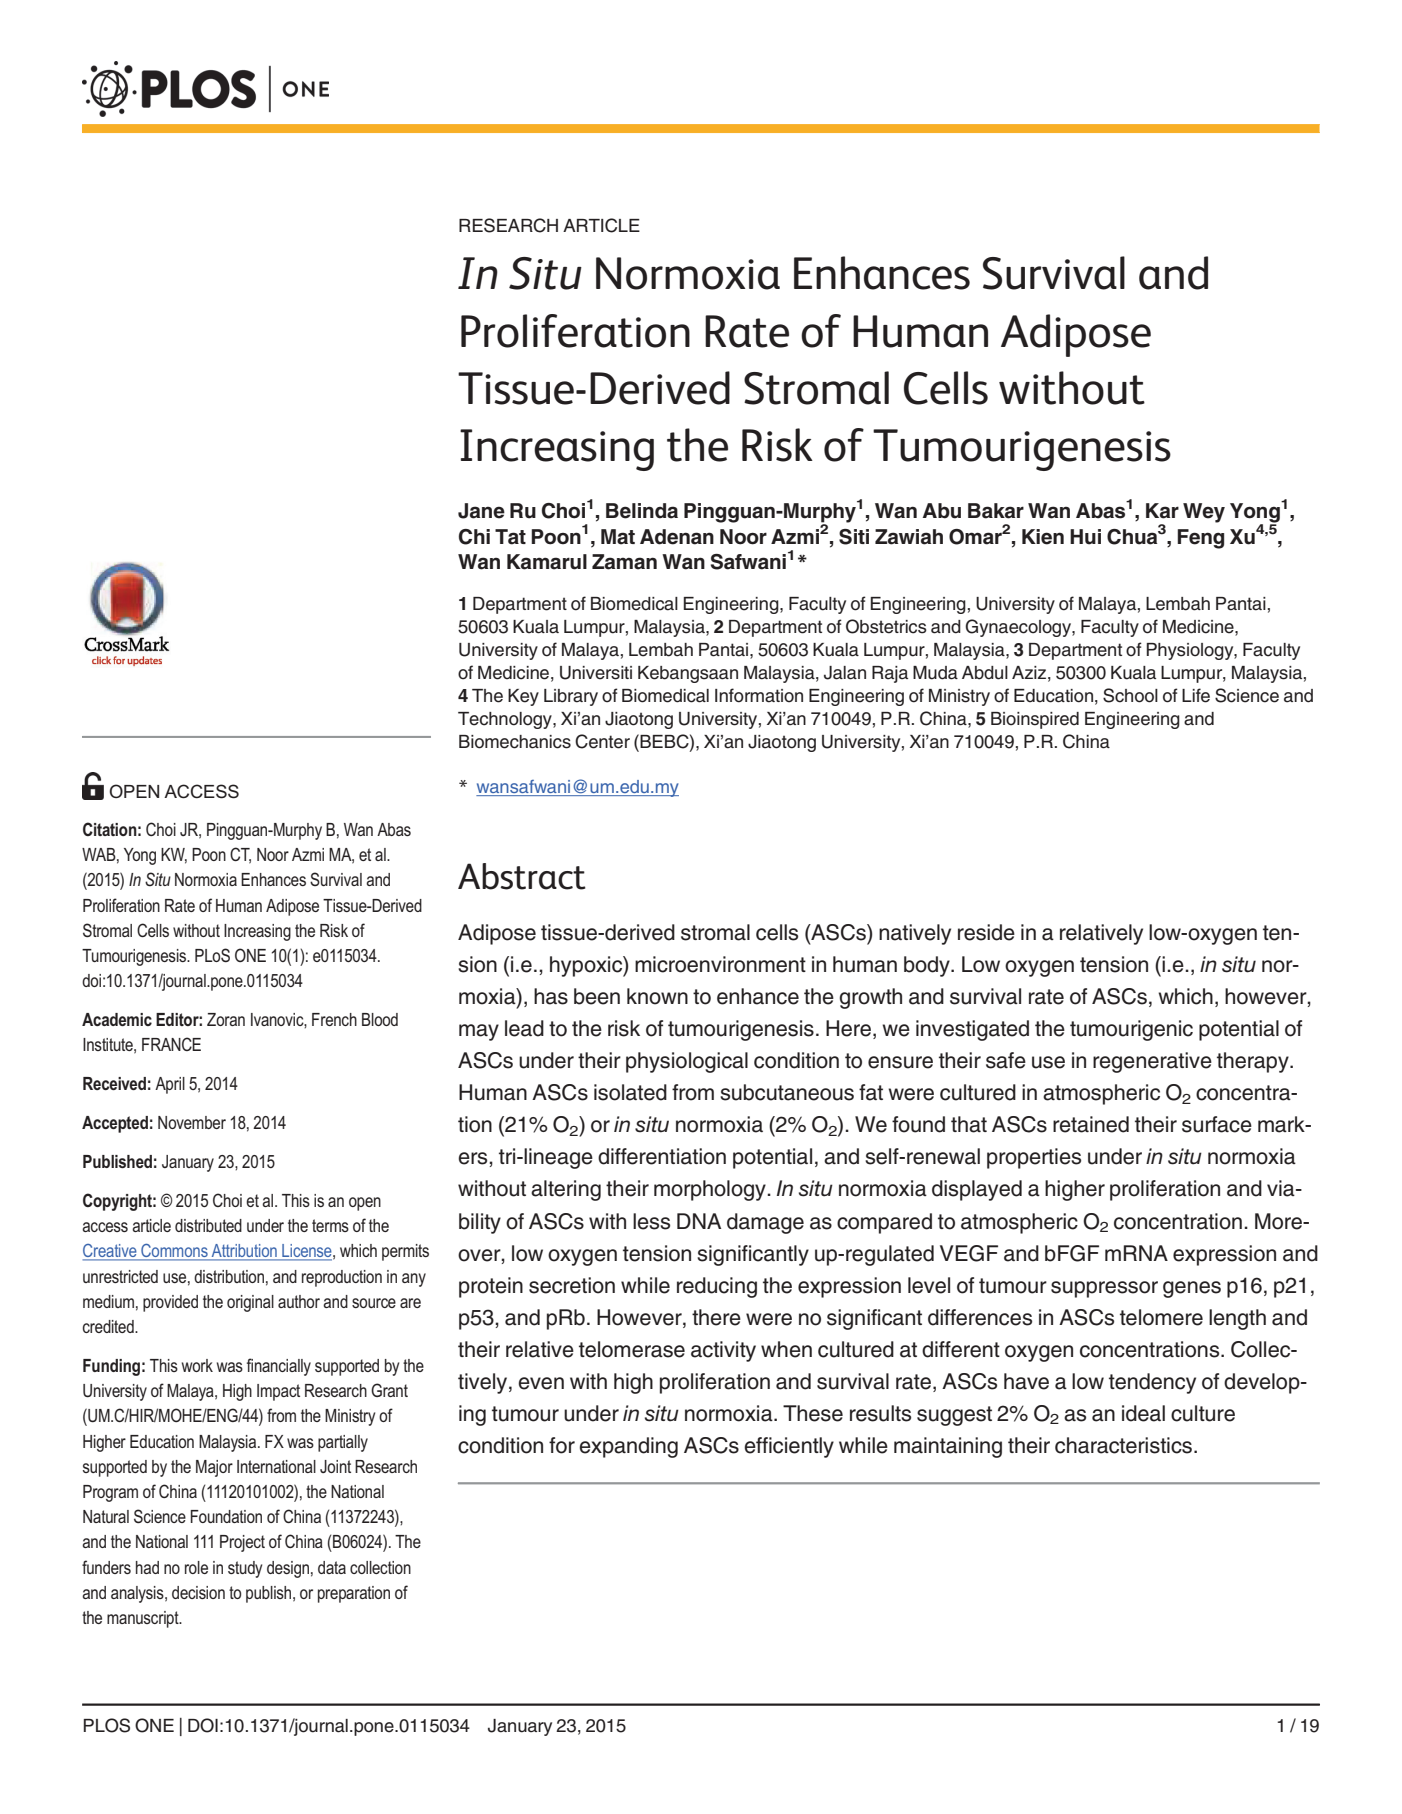 In Situ Normoxia Enhances Alt-Survival and Proliferation Rate of Human Adipose Tissue-Derived Stromal Cells without 	Increasing the Risk of Tumorigenesis